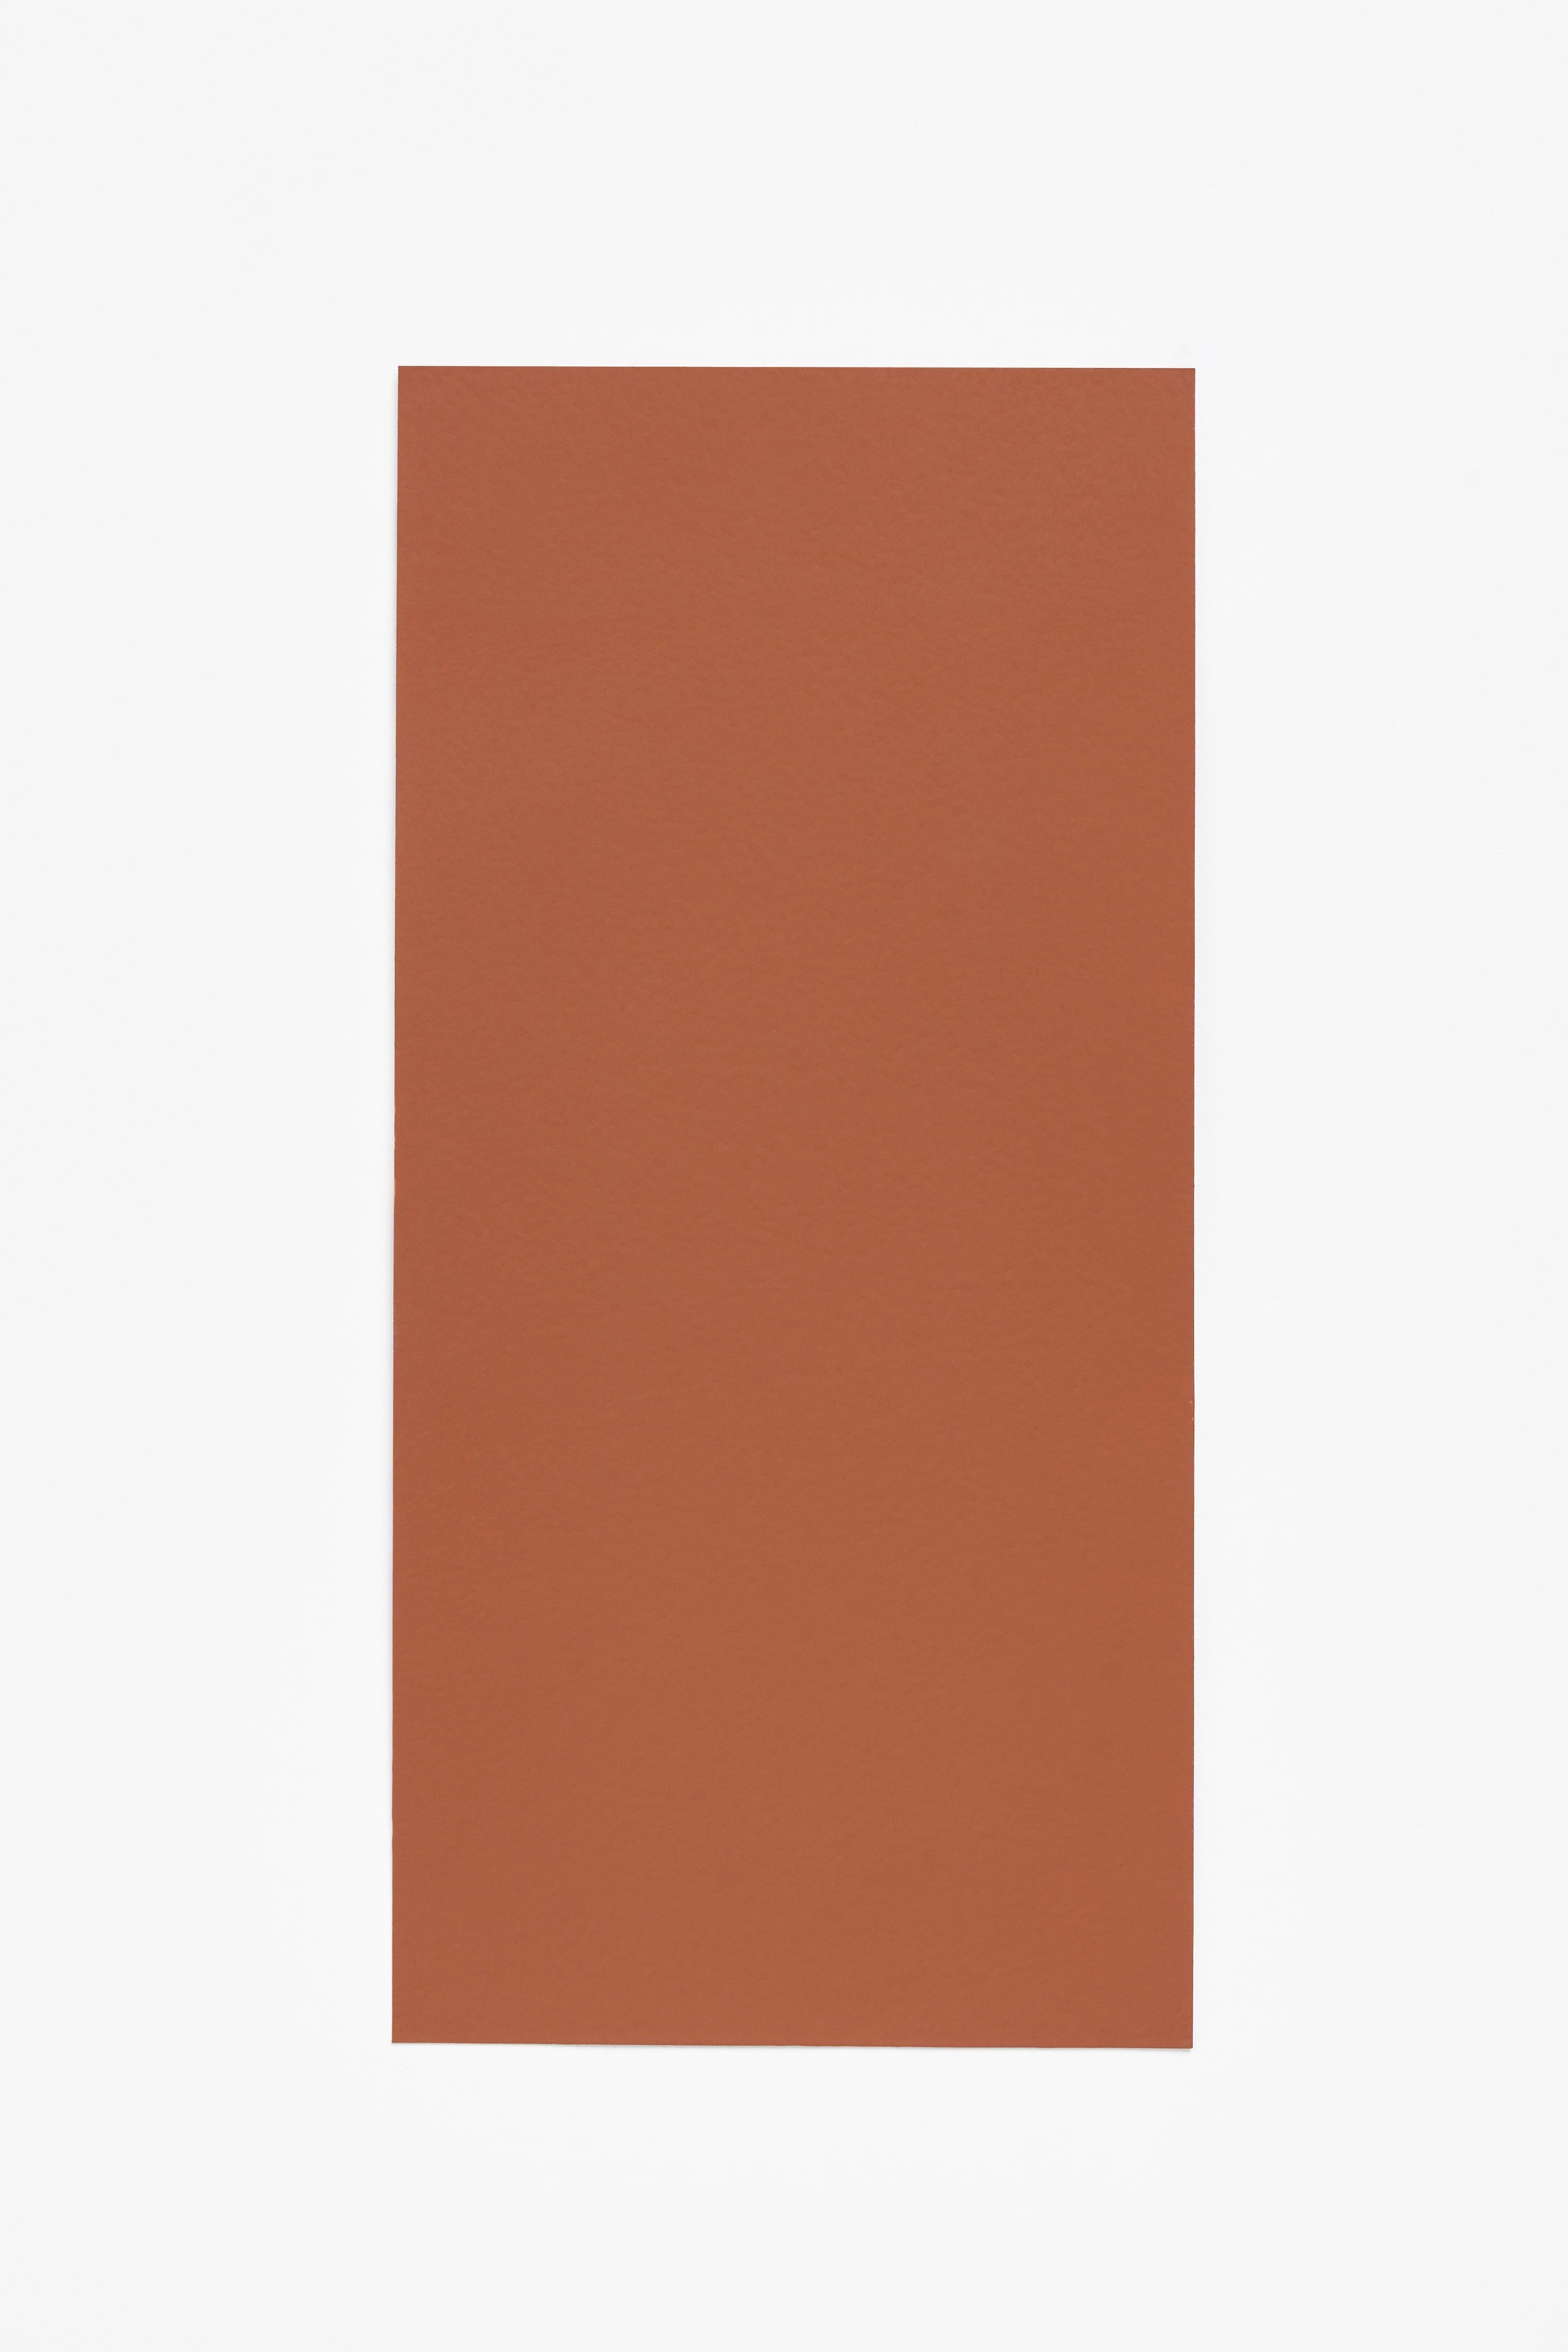 Brick Red — a paint colour developed by Norm Architects for Blēo